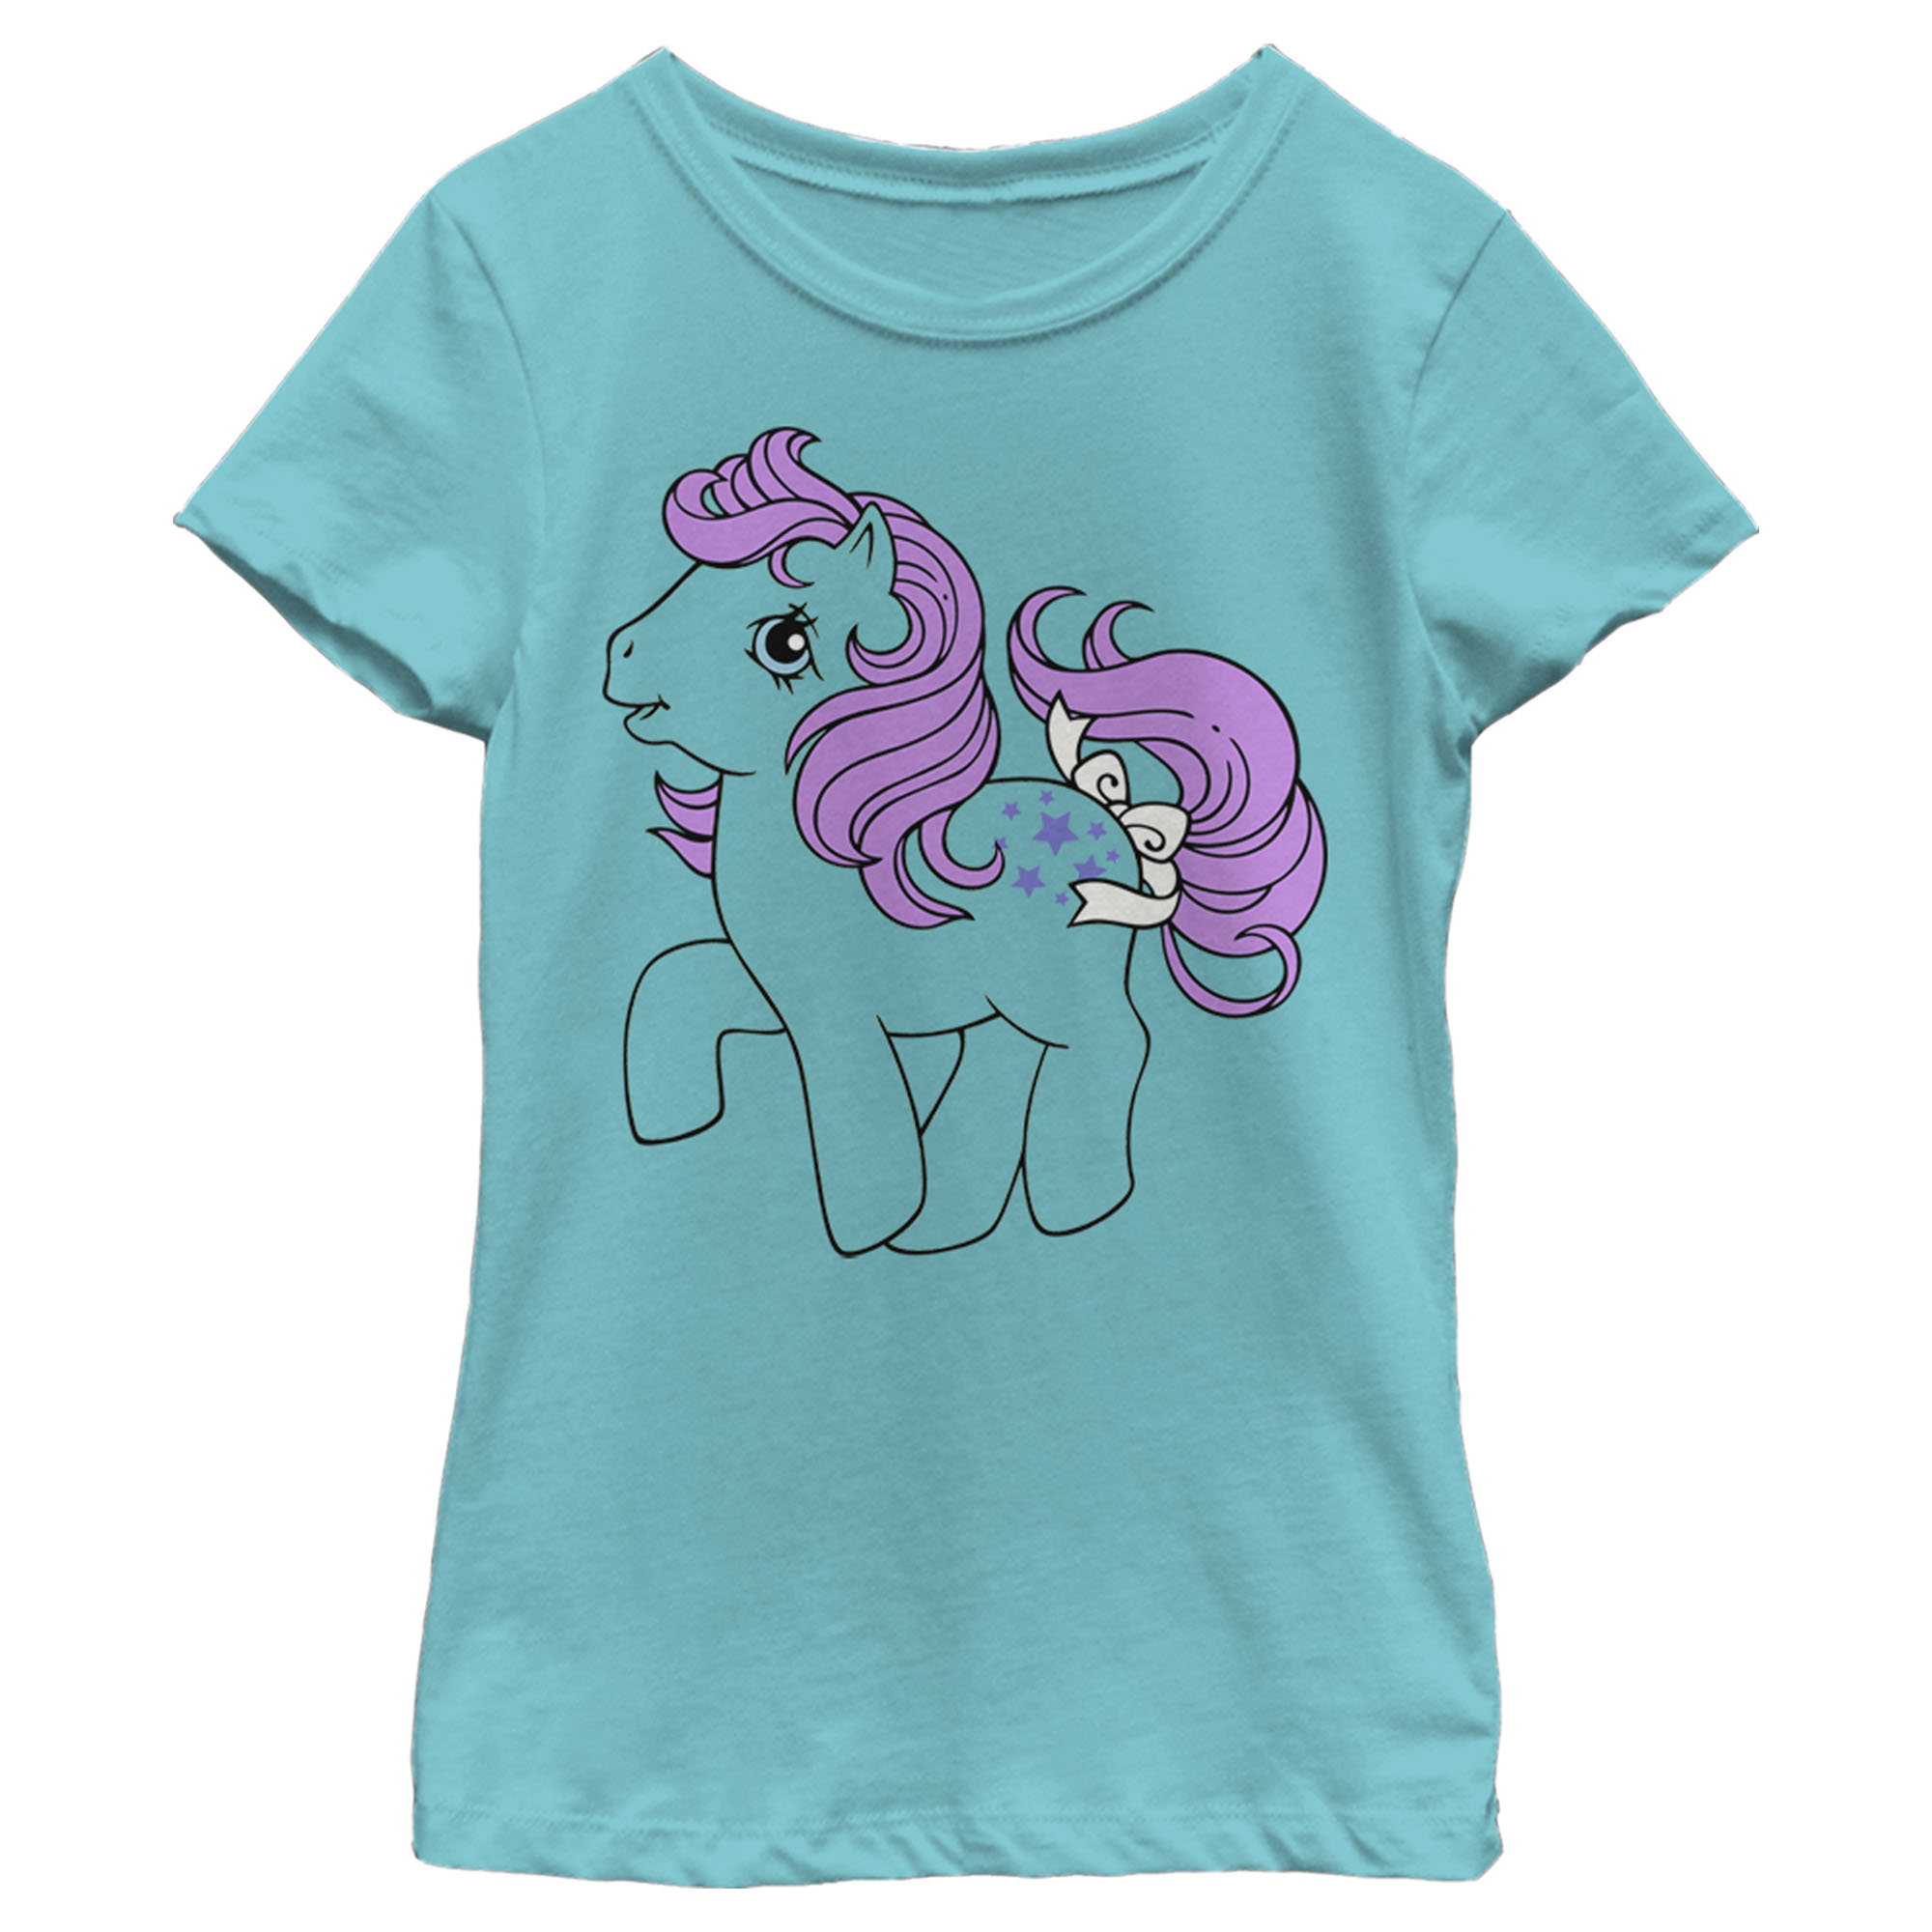 My Little Pony Girl's My Little Pony Blue Belle Cutie Mark  Graphic T-Shirt